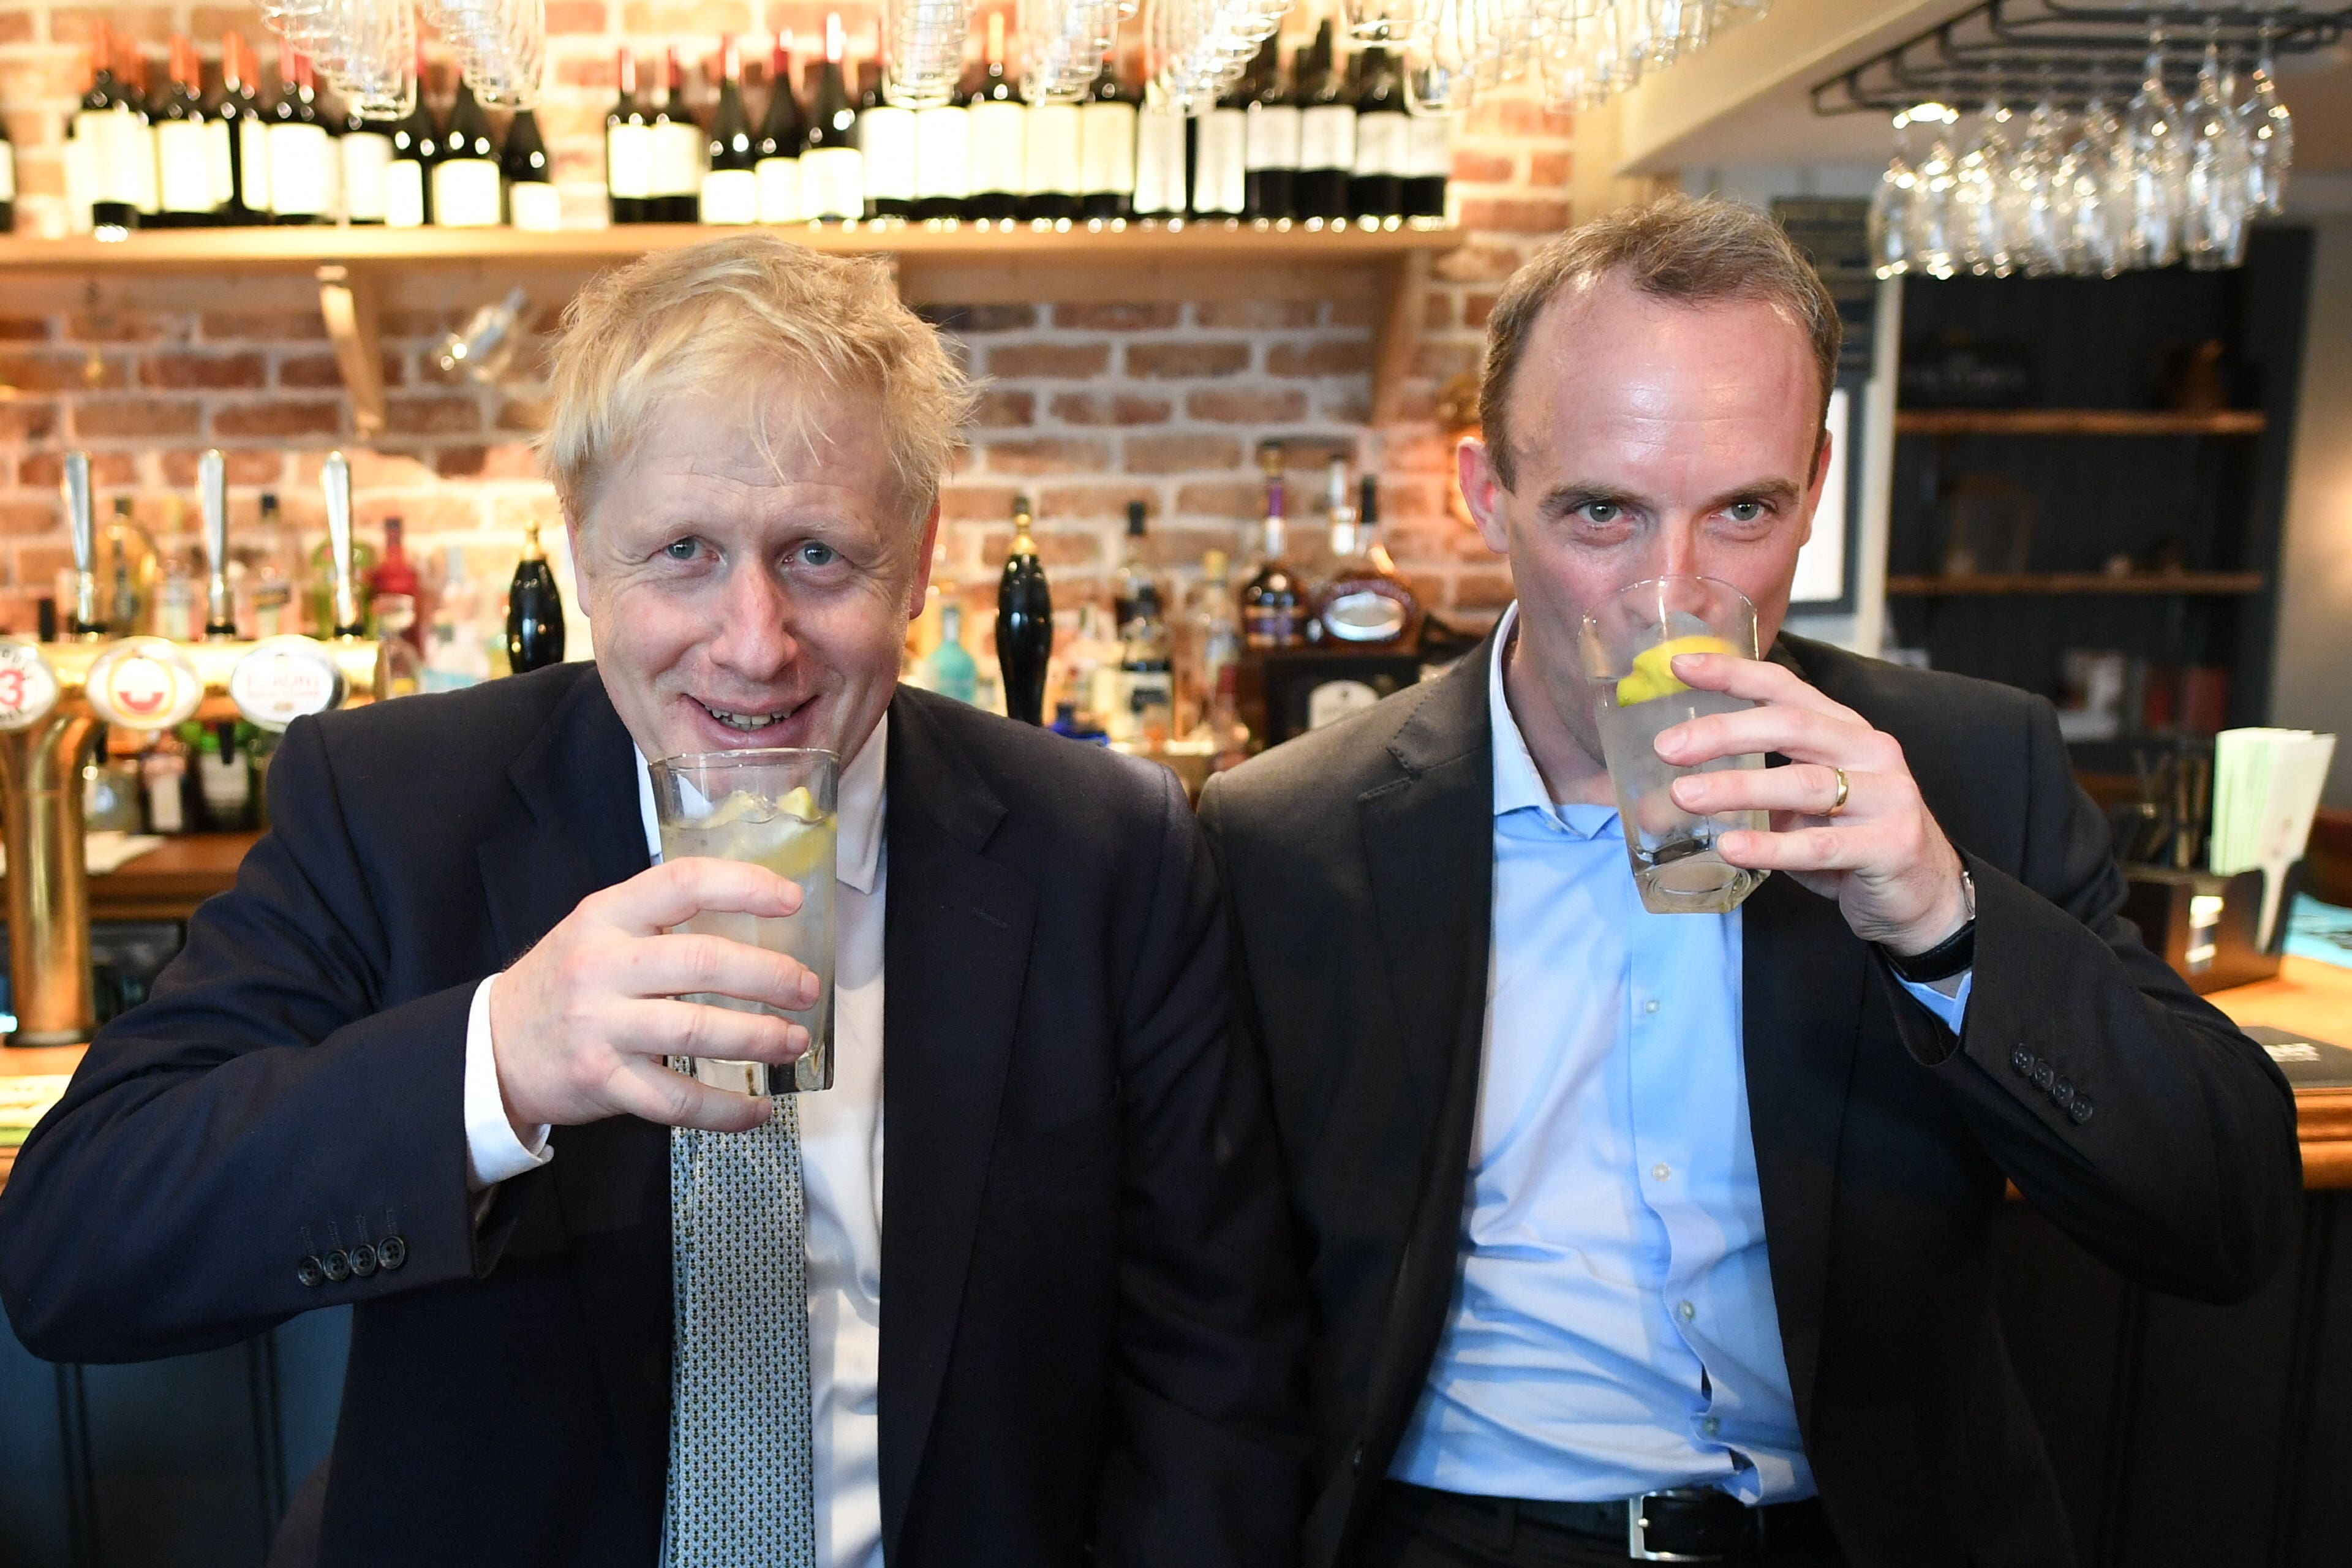 Former prime minister Boris Johnson reportedly privately warned Dominic Raab about his conduct when the latter held several cabinet positions under Mr Johnson’s leadership (Stefan Rousseau/PA)